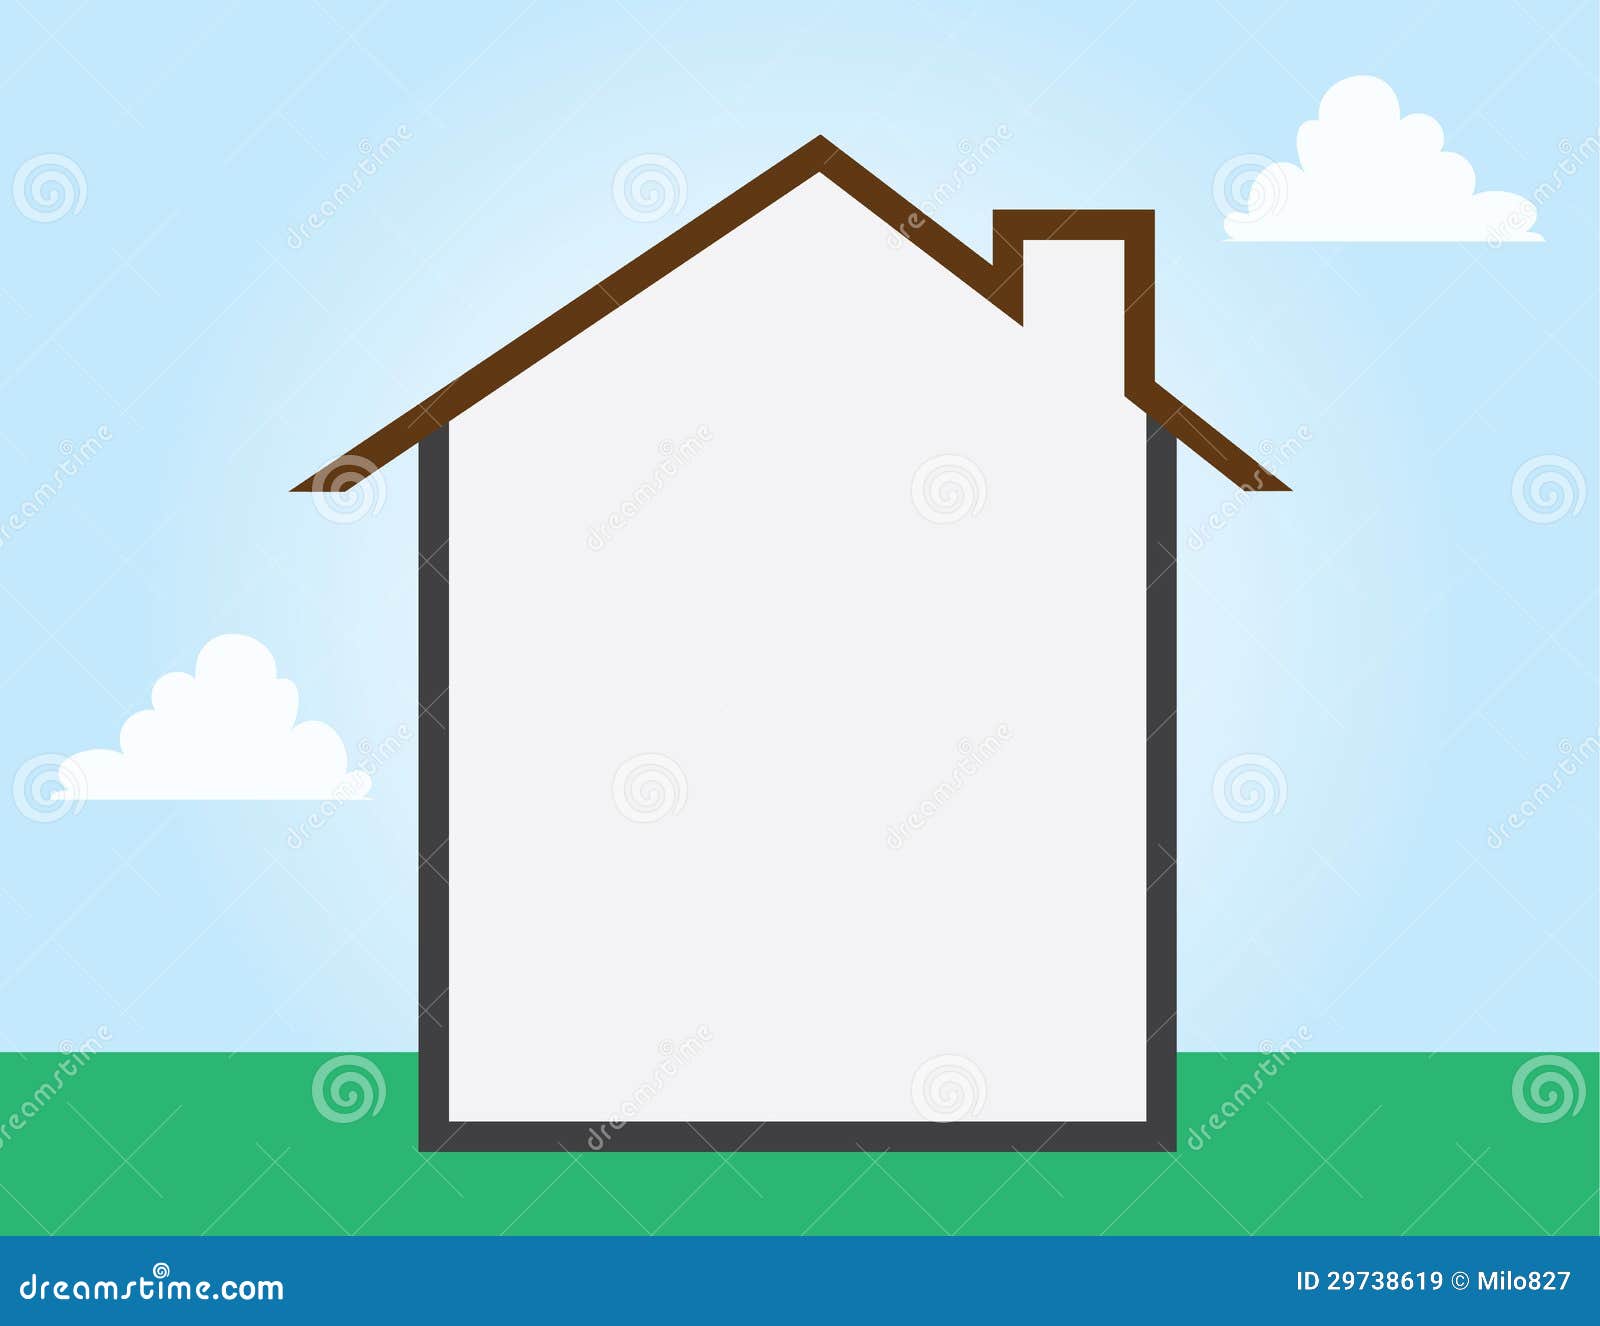 House Outline Empty Royalty Free Stock Images - Image: 29738619